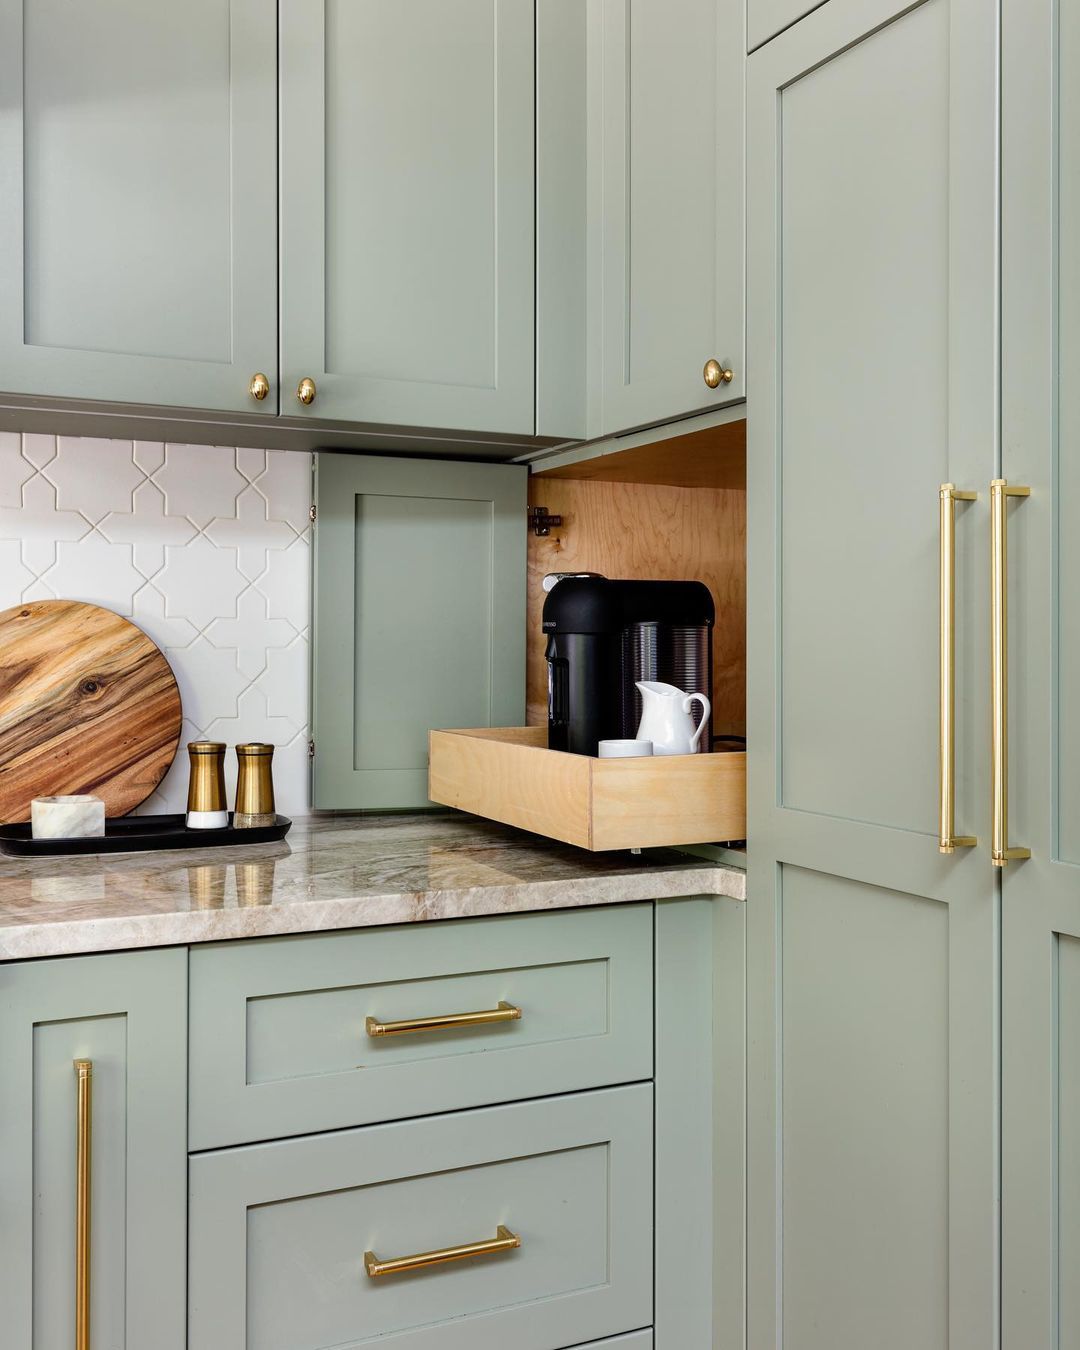 Sage green kitchen cabinets with appliance garage popping out